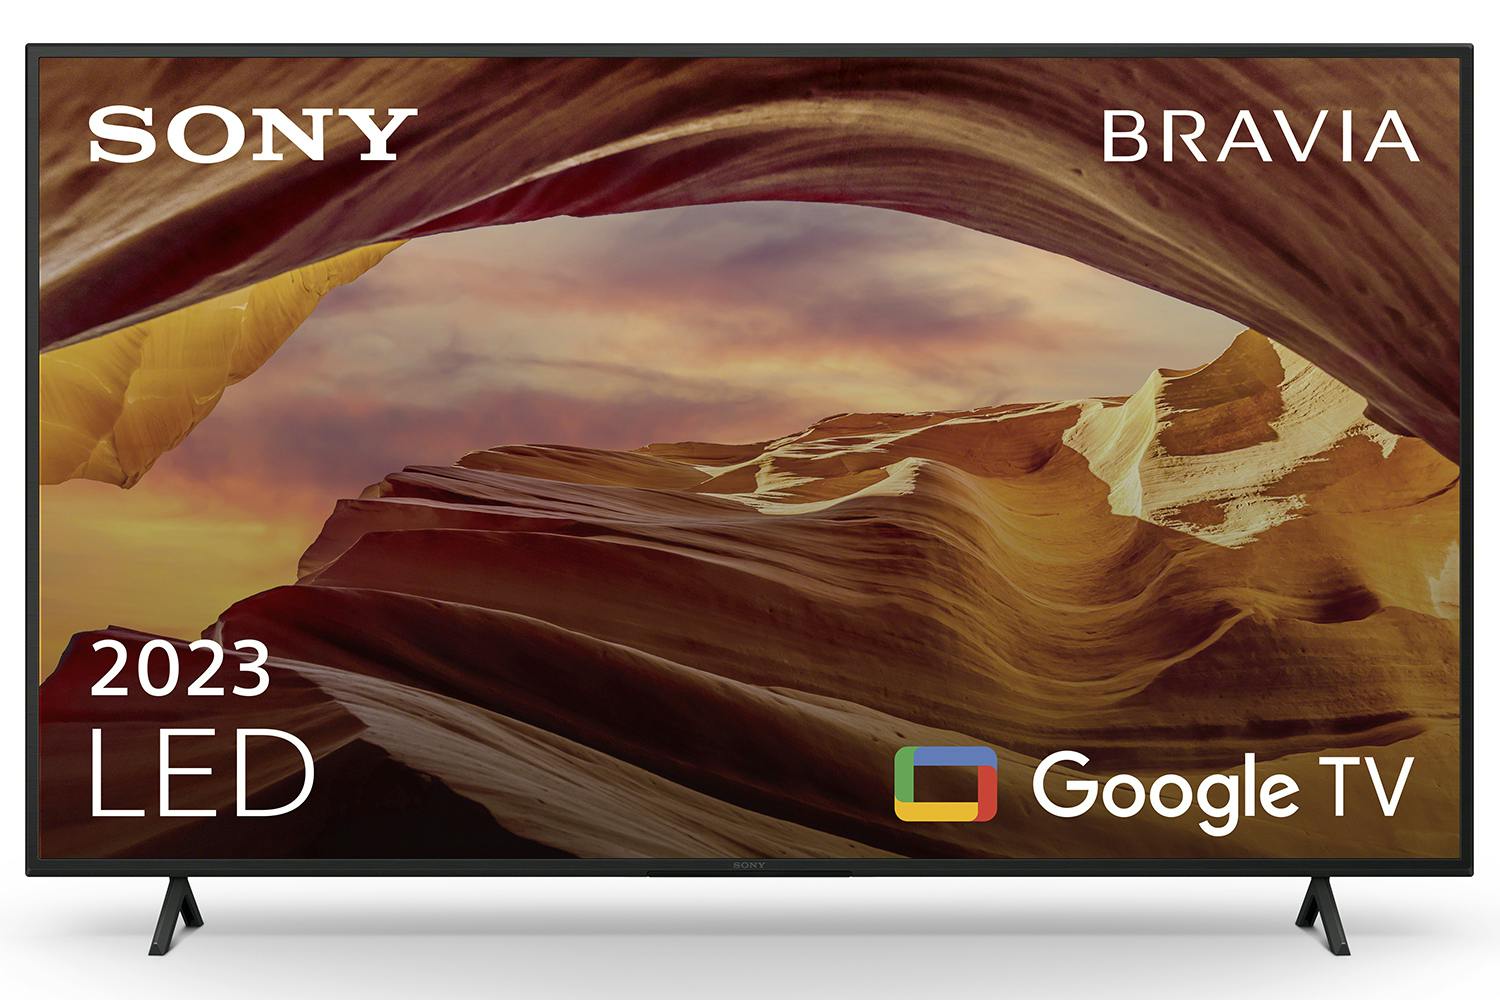 How to check if your BRAVIA TV is a Google TV™, Android TV™, or